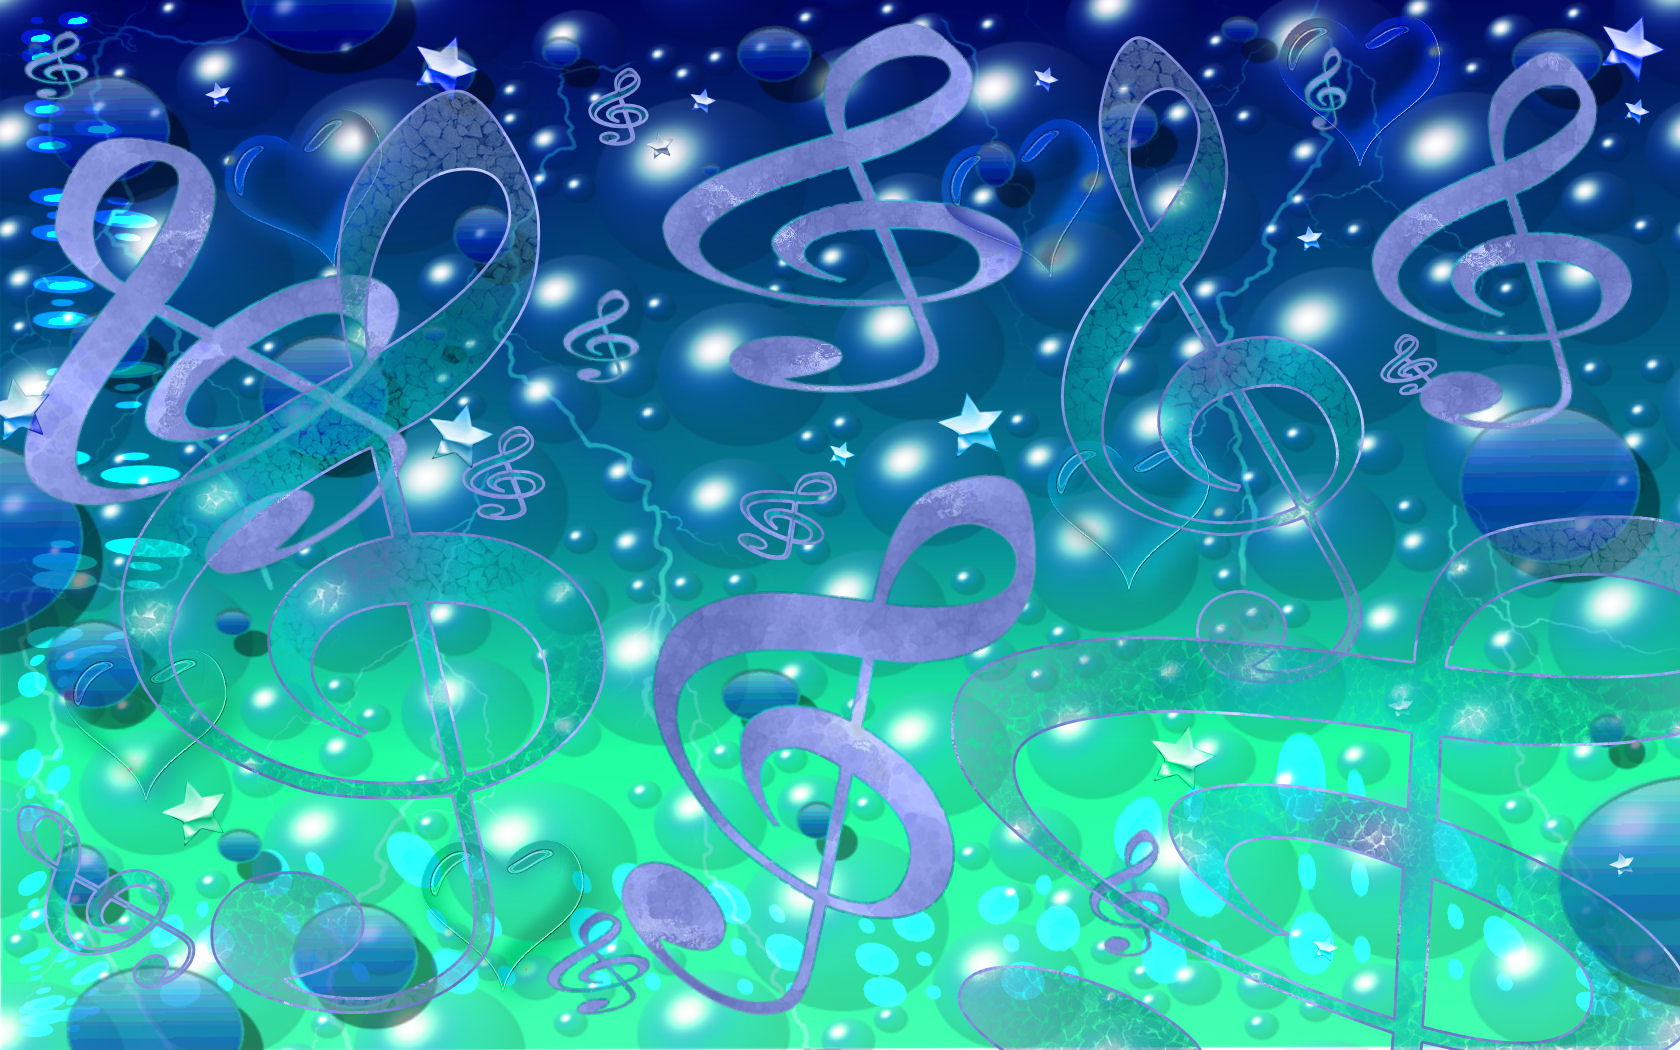 Blue Music Wallpaper Which Is Under The